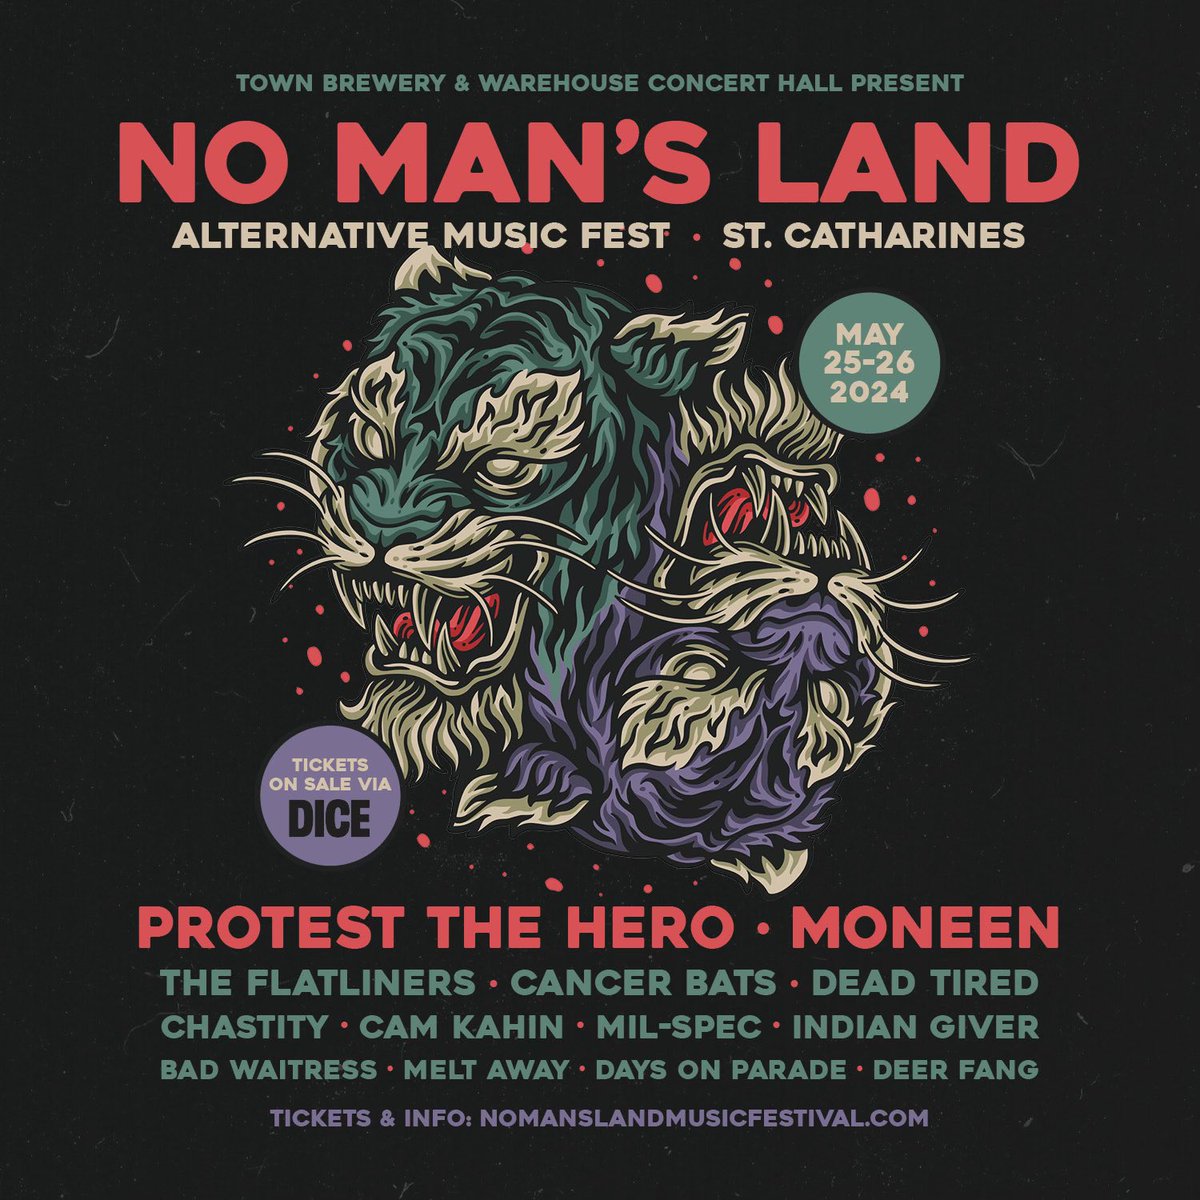 St. Catharines - we are back this May playing No Man’s Land Music Fest. Tickets on sale this Friday. link.dice.fm/H26b02549bd0